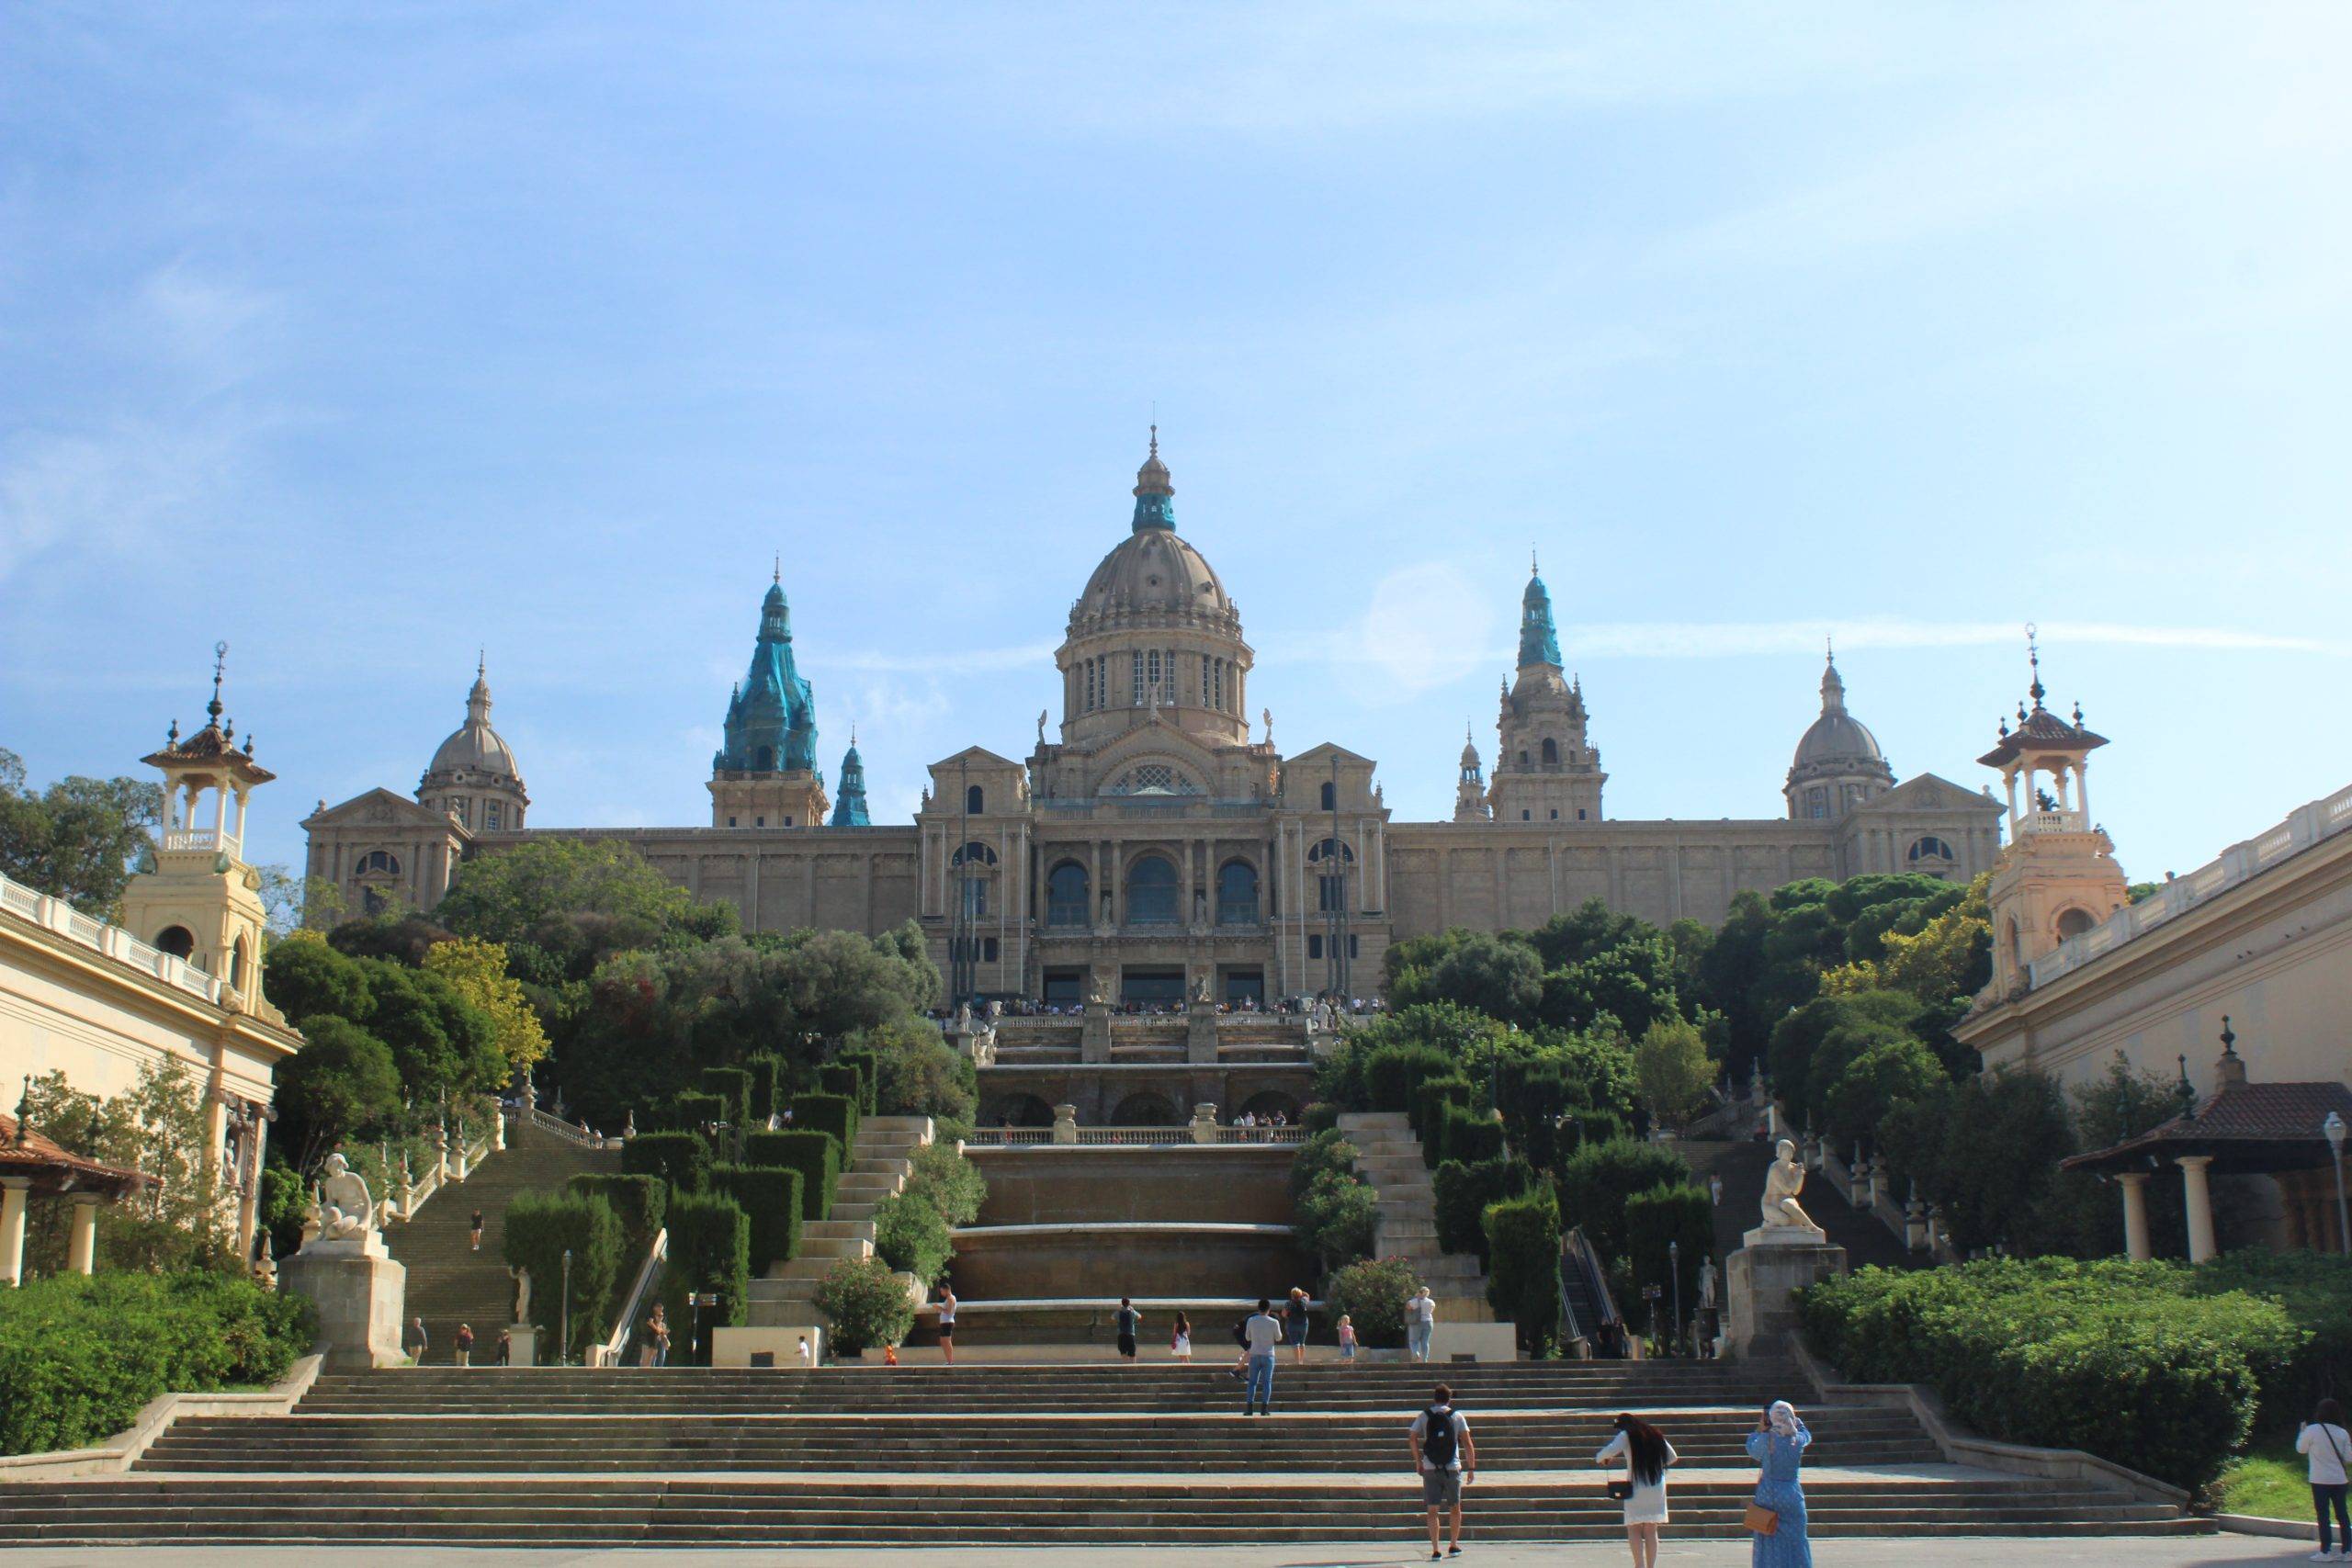 National Palace of Montjuic